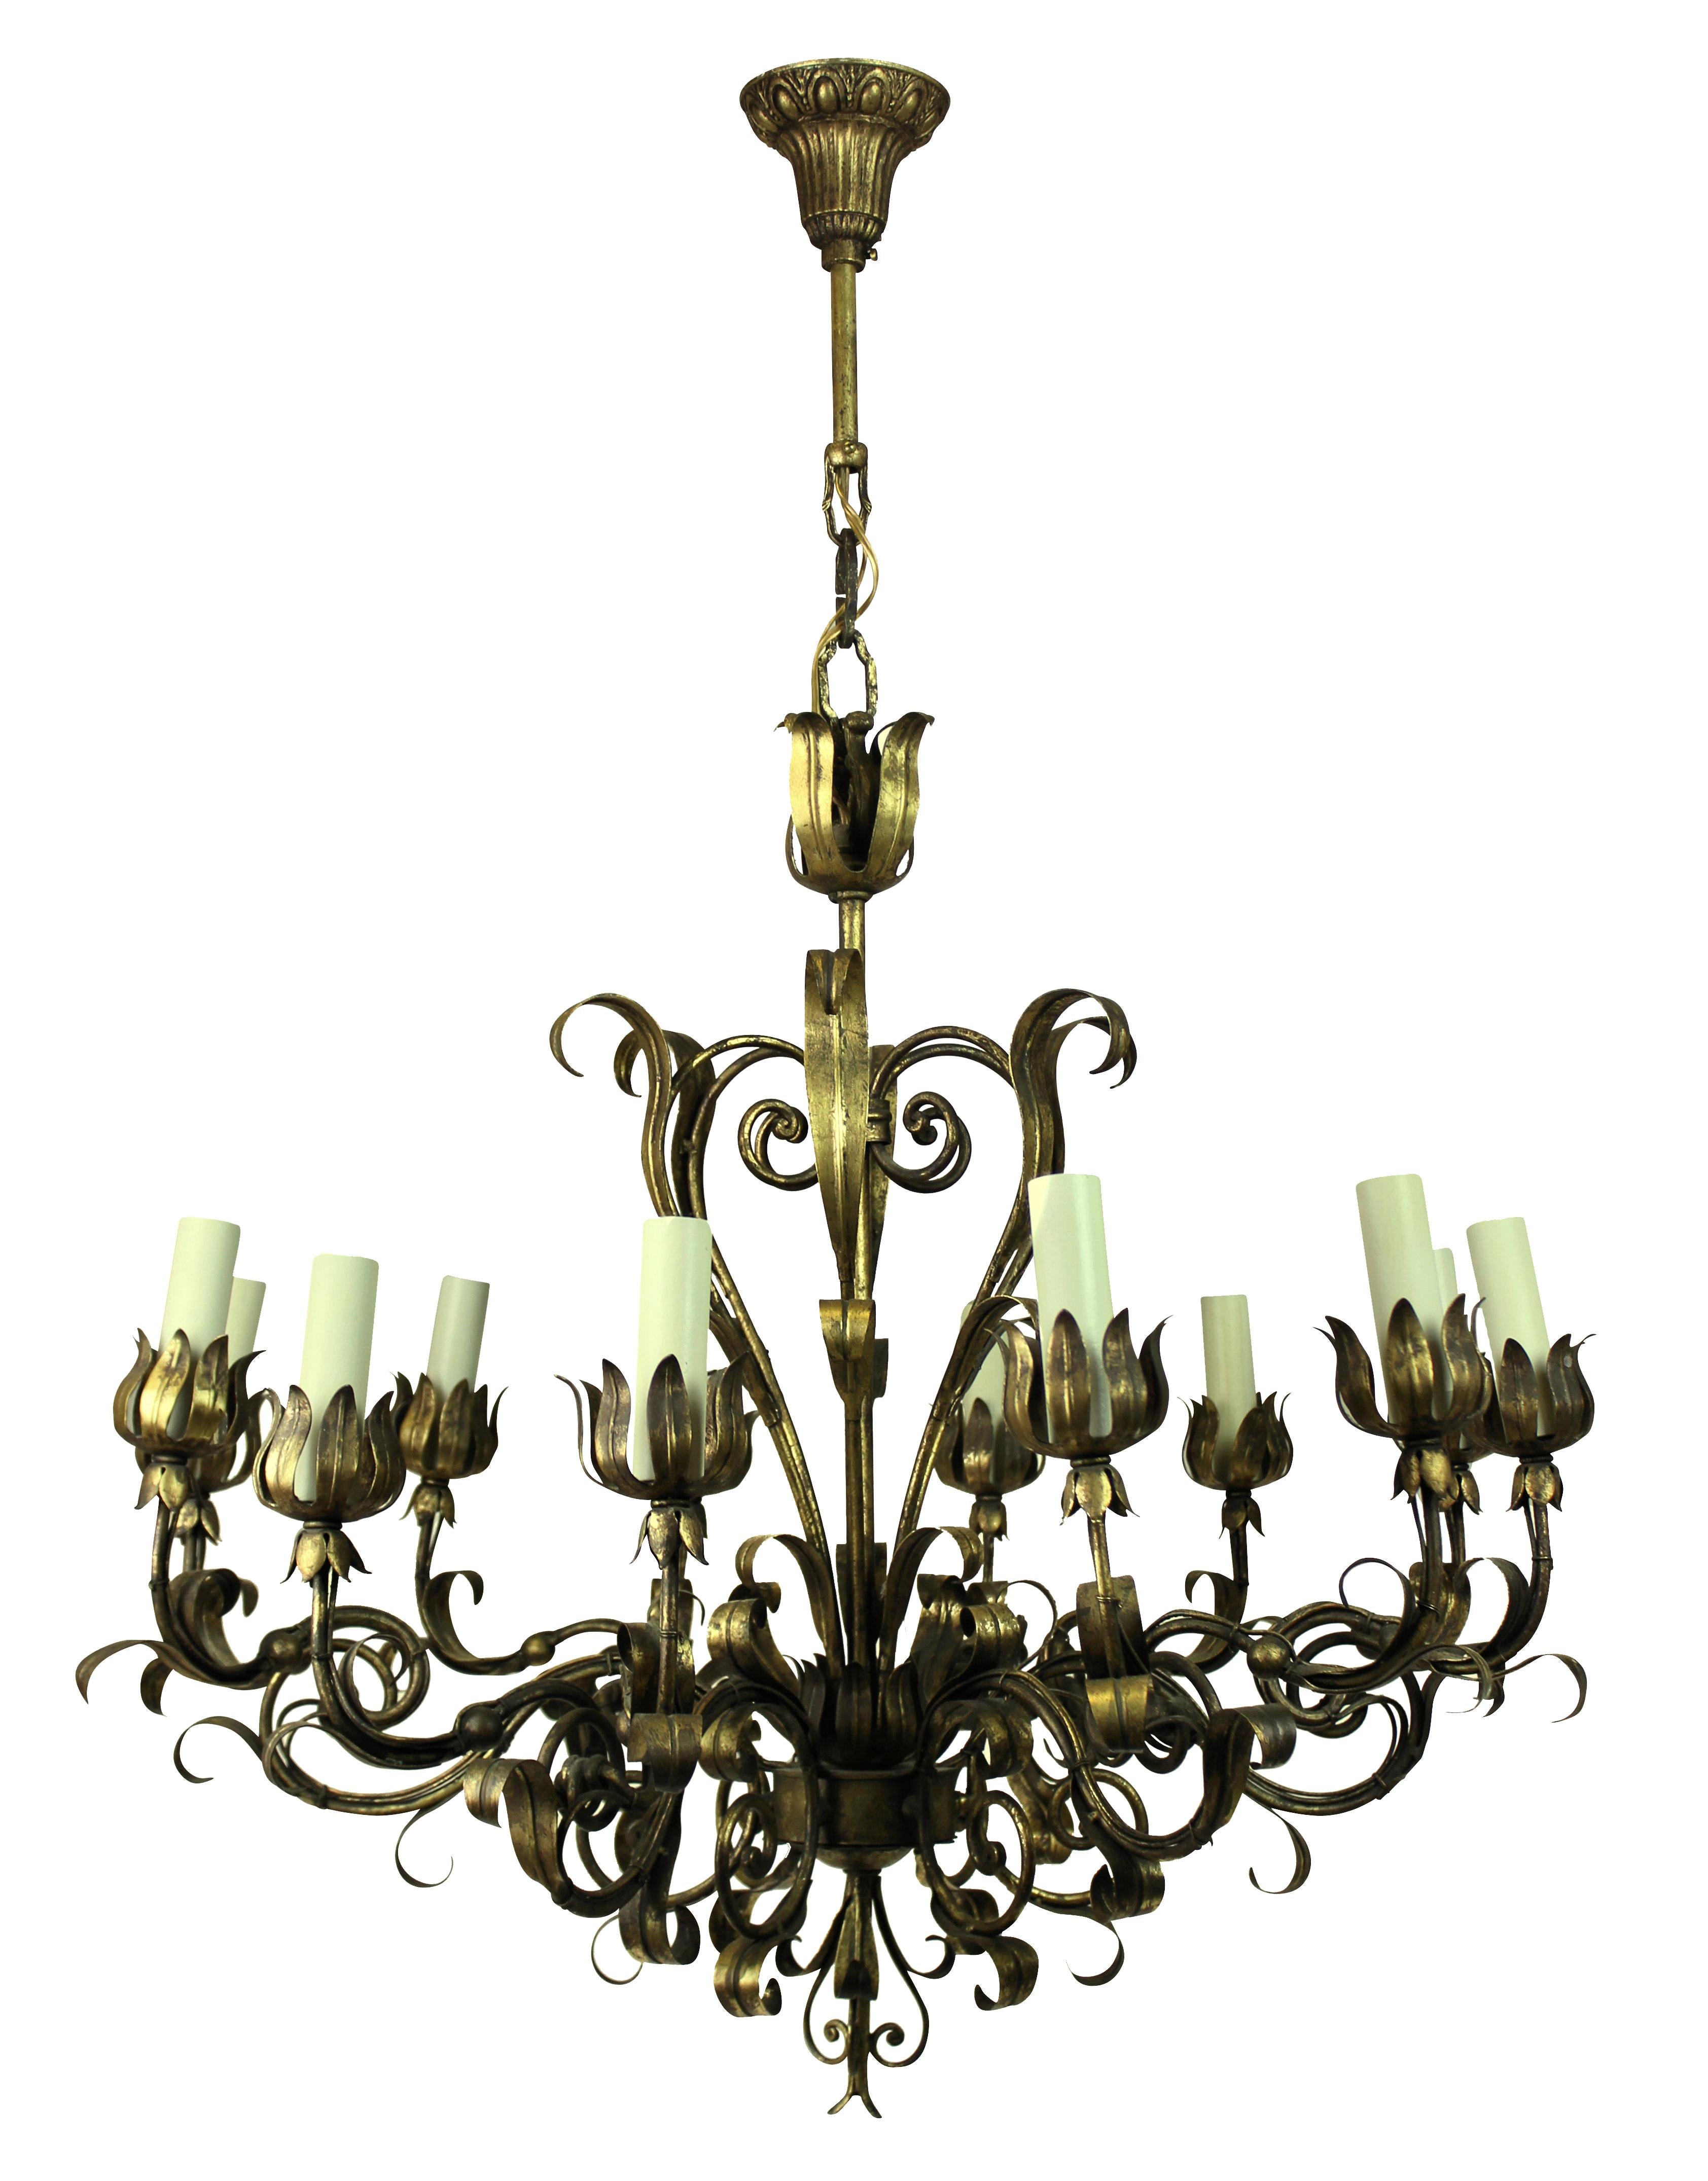 Mid-20th Century Gilded Wrought Iron Chandelier